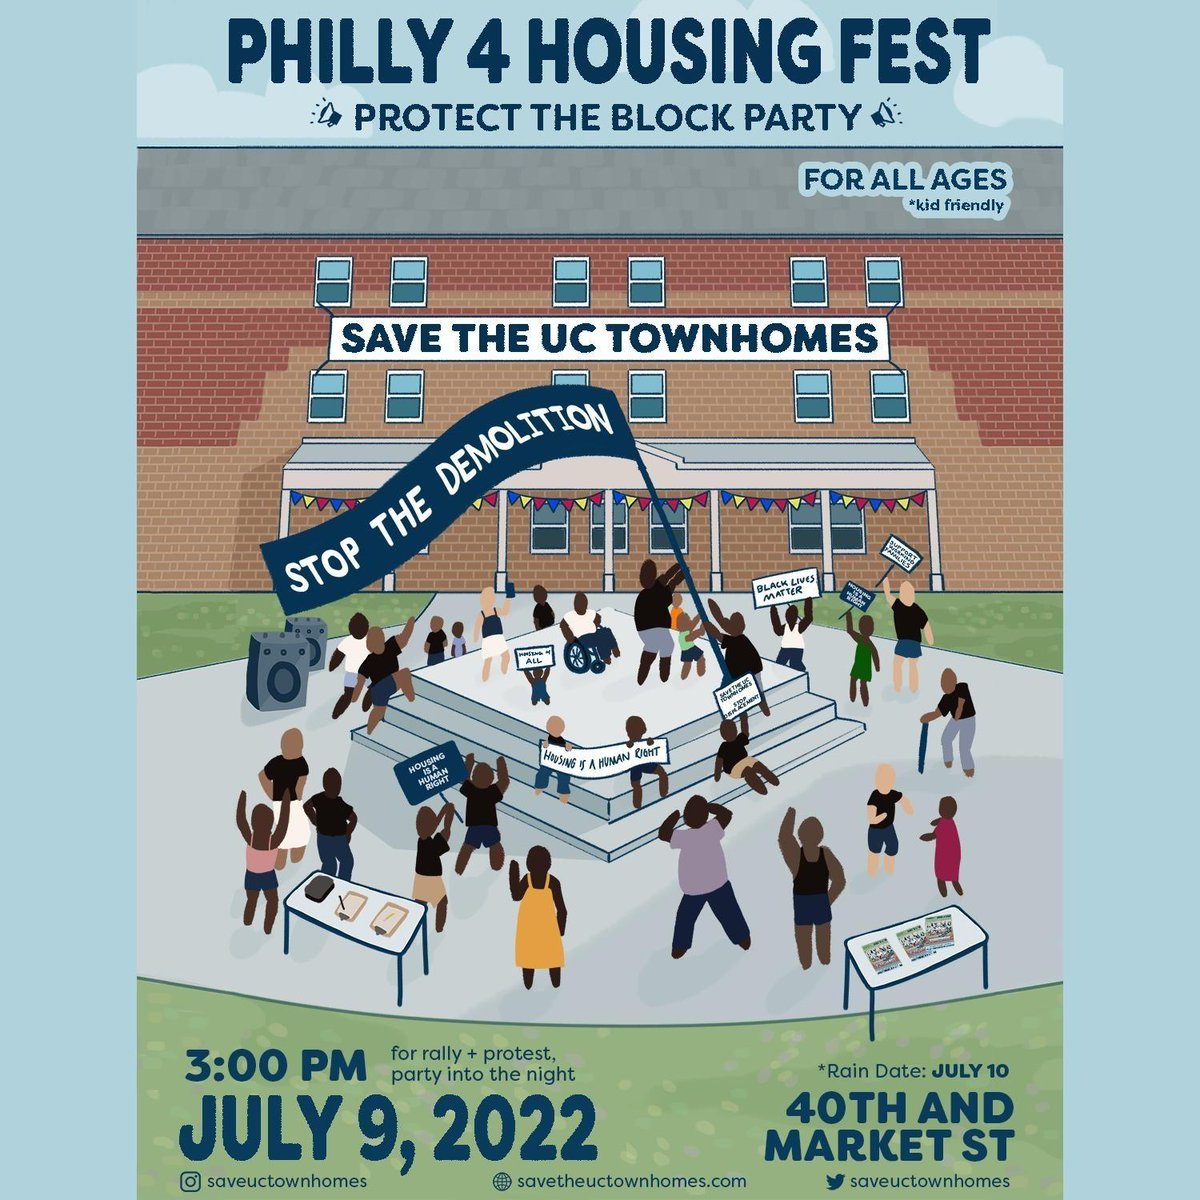 This Saturday, July 9 in Philly, come out for Save the UC Townhomes' Philly 4 Housing Fest / Protect The Block Party at 40th and Market St., starting at 3pm: 